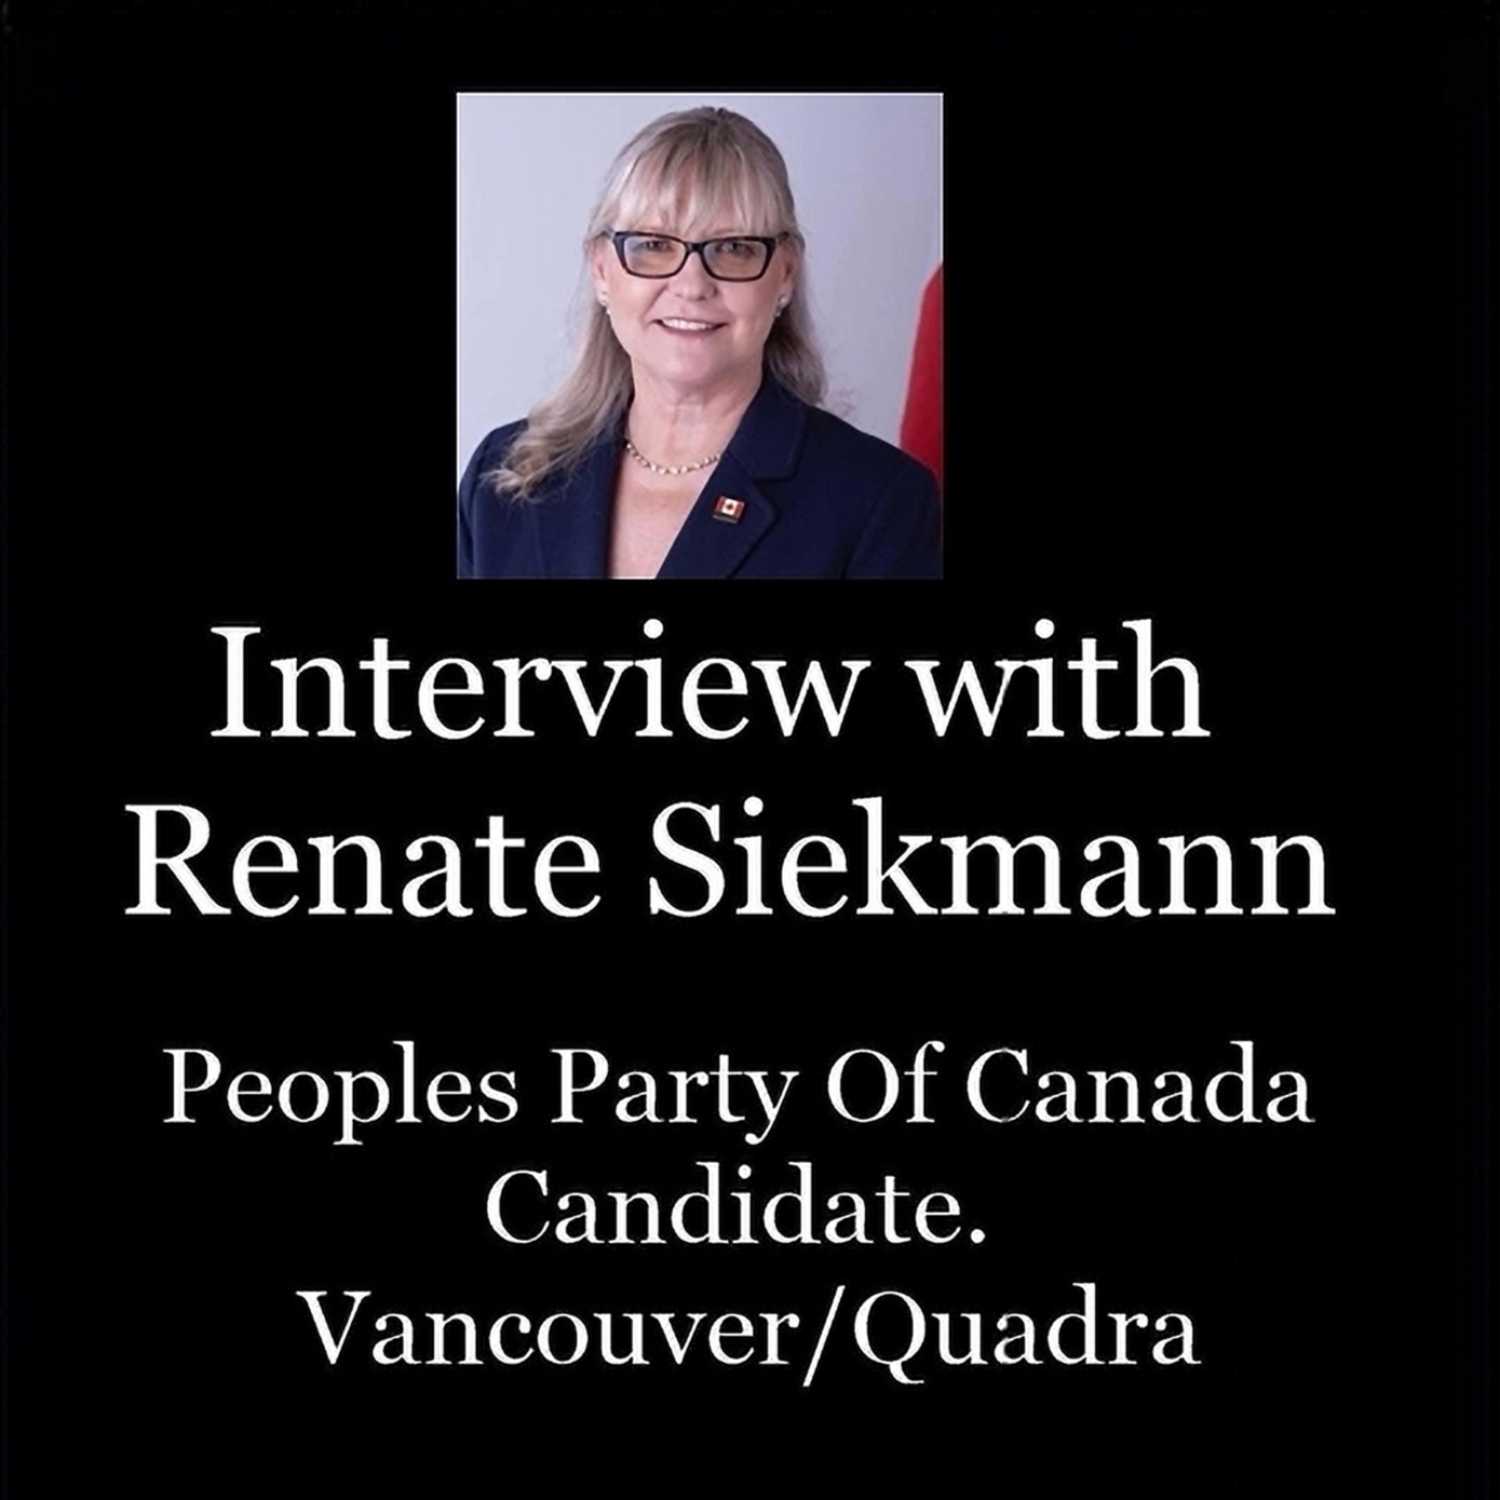 Interview with Renate Siekmann Sep 17th 2021